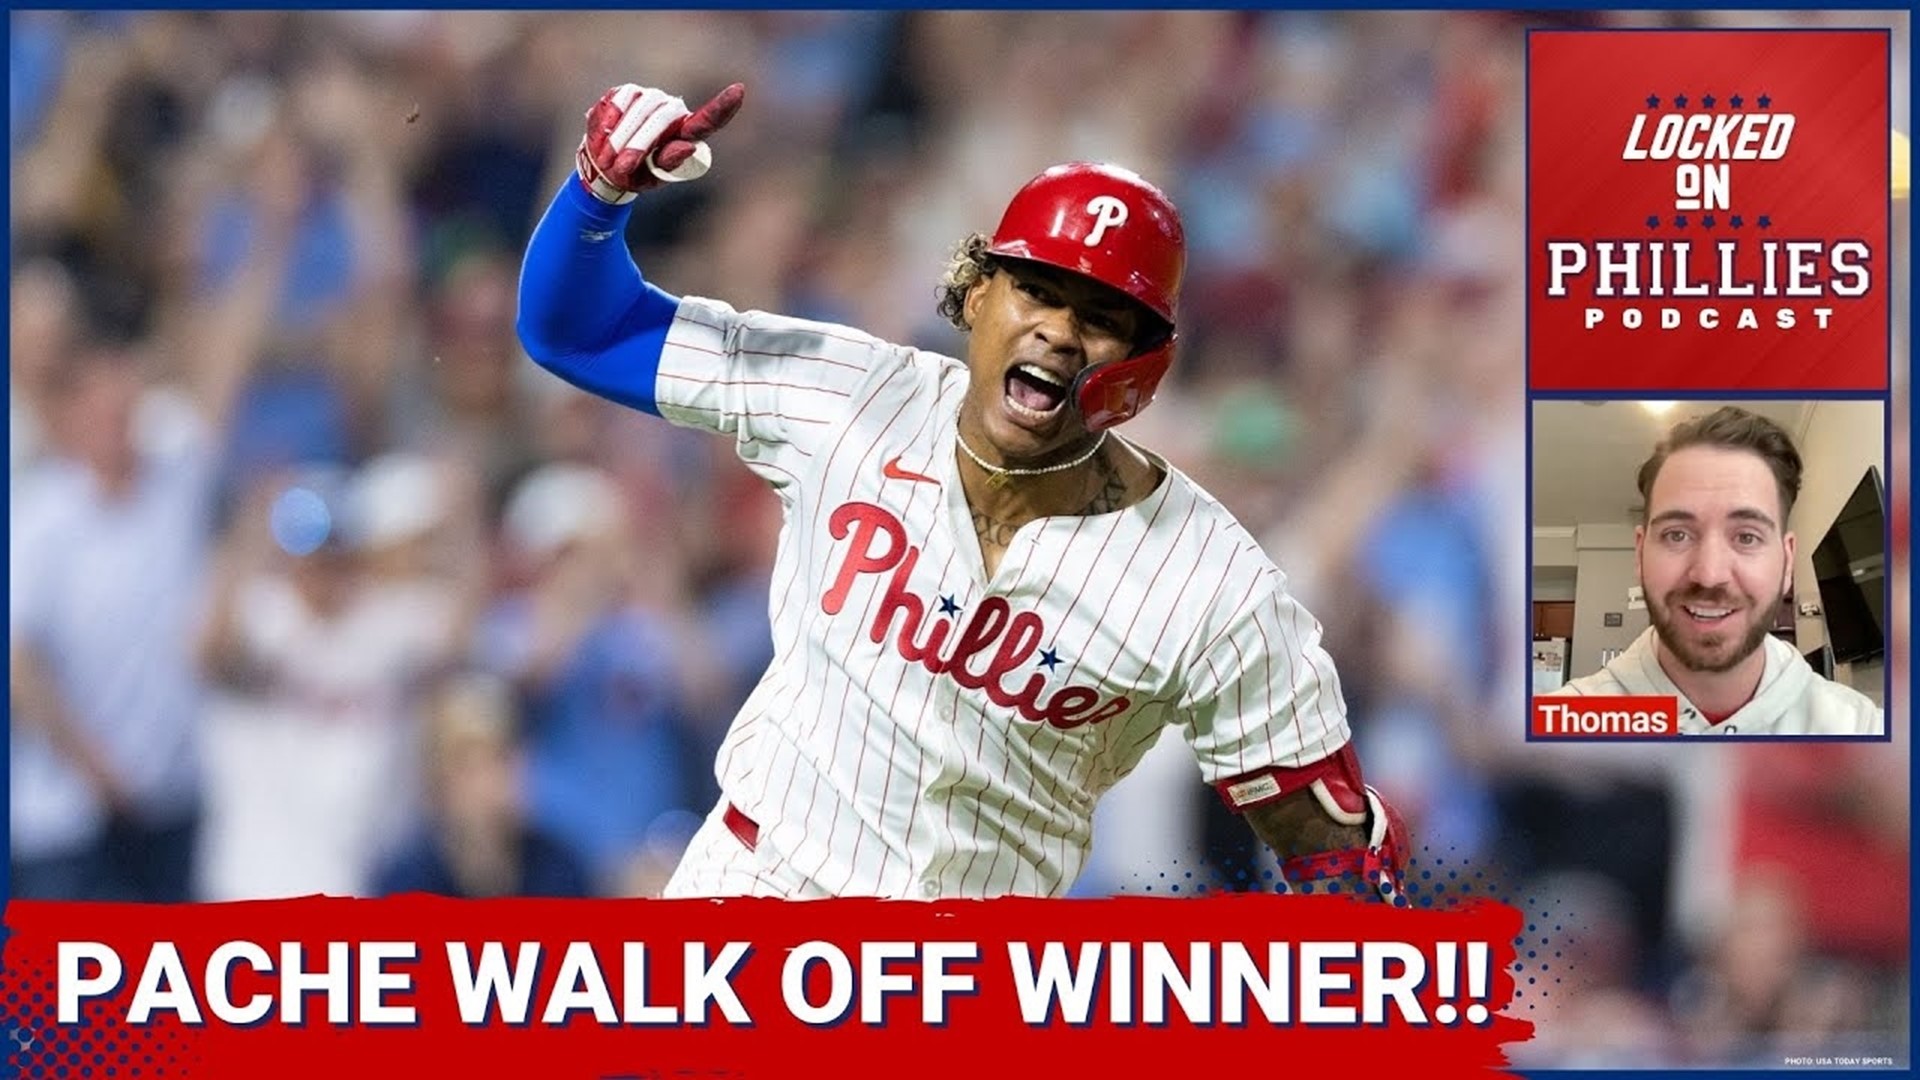 In today's episode, Connor celebrates the Philadelphia Phillies' walk off win over the Colorado Rockies last night thanks to Cristian Pache's 10th inning single!